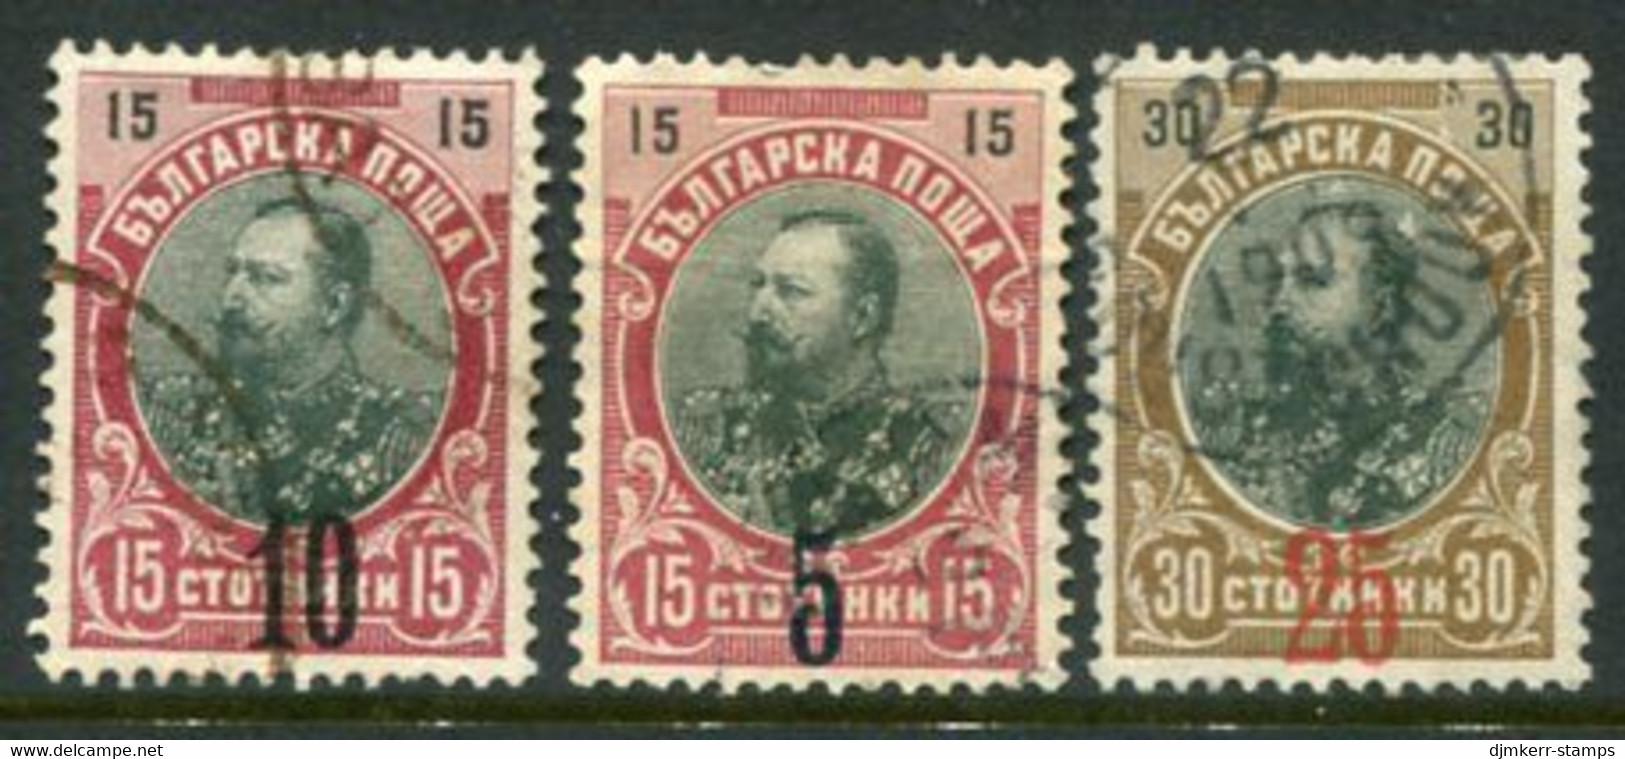 BULGARIA 1903-09  Surcharges 10 On 15 St. 5 On 15 St. And 25 On 30 St. Used.  Michel 65, 69-70 - Used Stamps